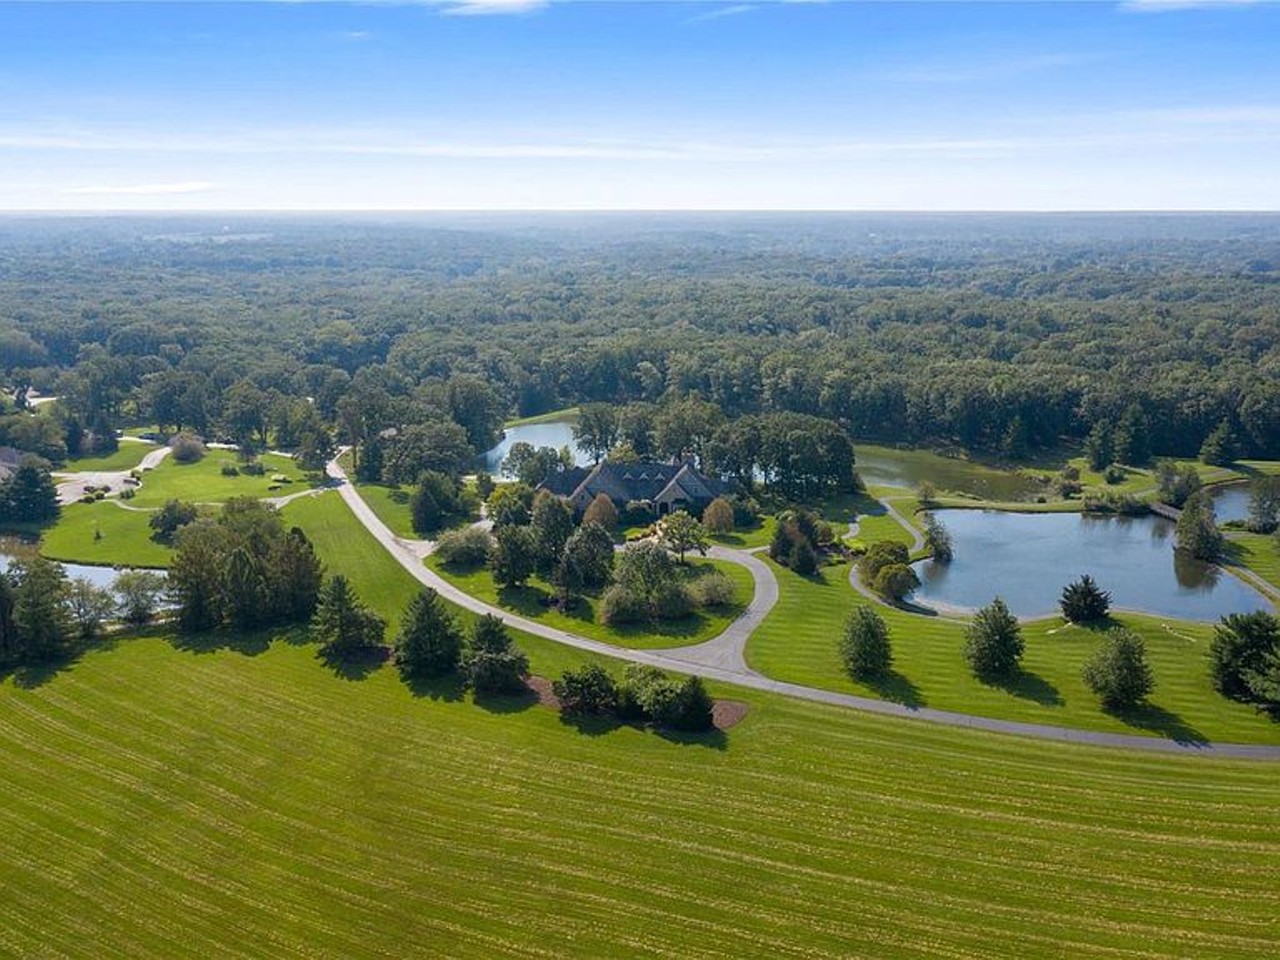 Even the Dogs Get Their Own Mansion at Missouri&#146;s Most Expensive House [PHOTOS]